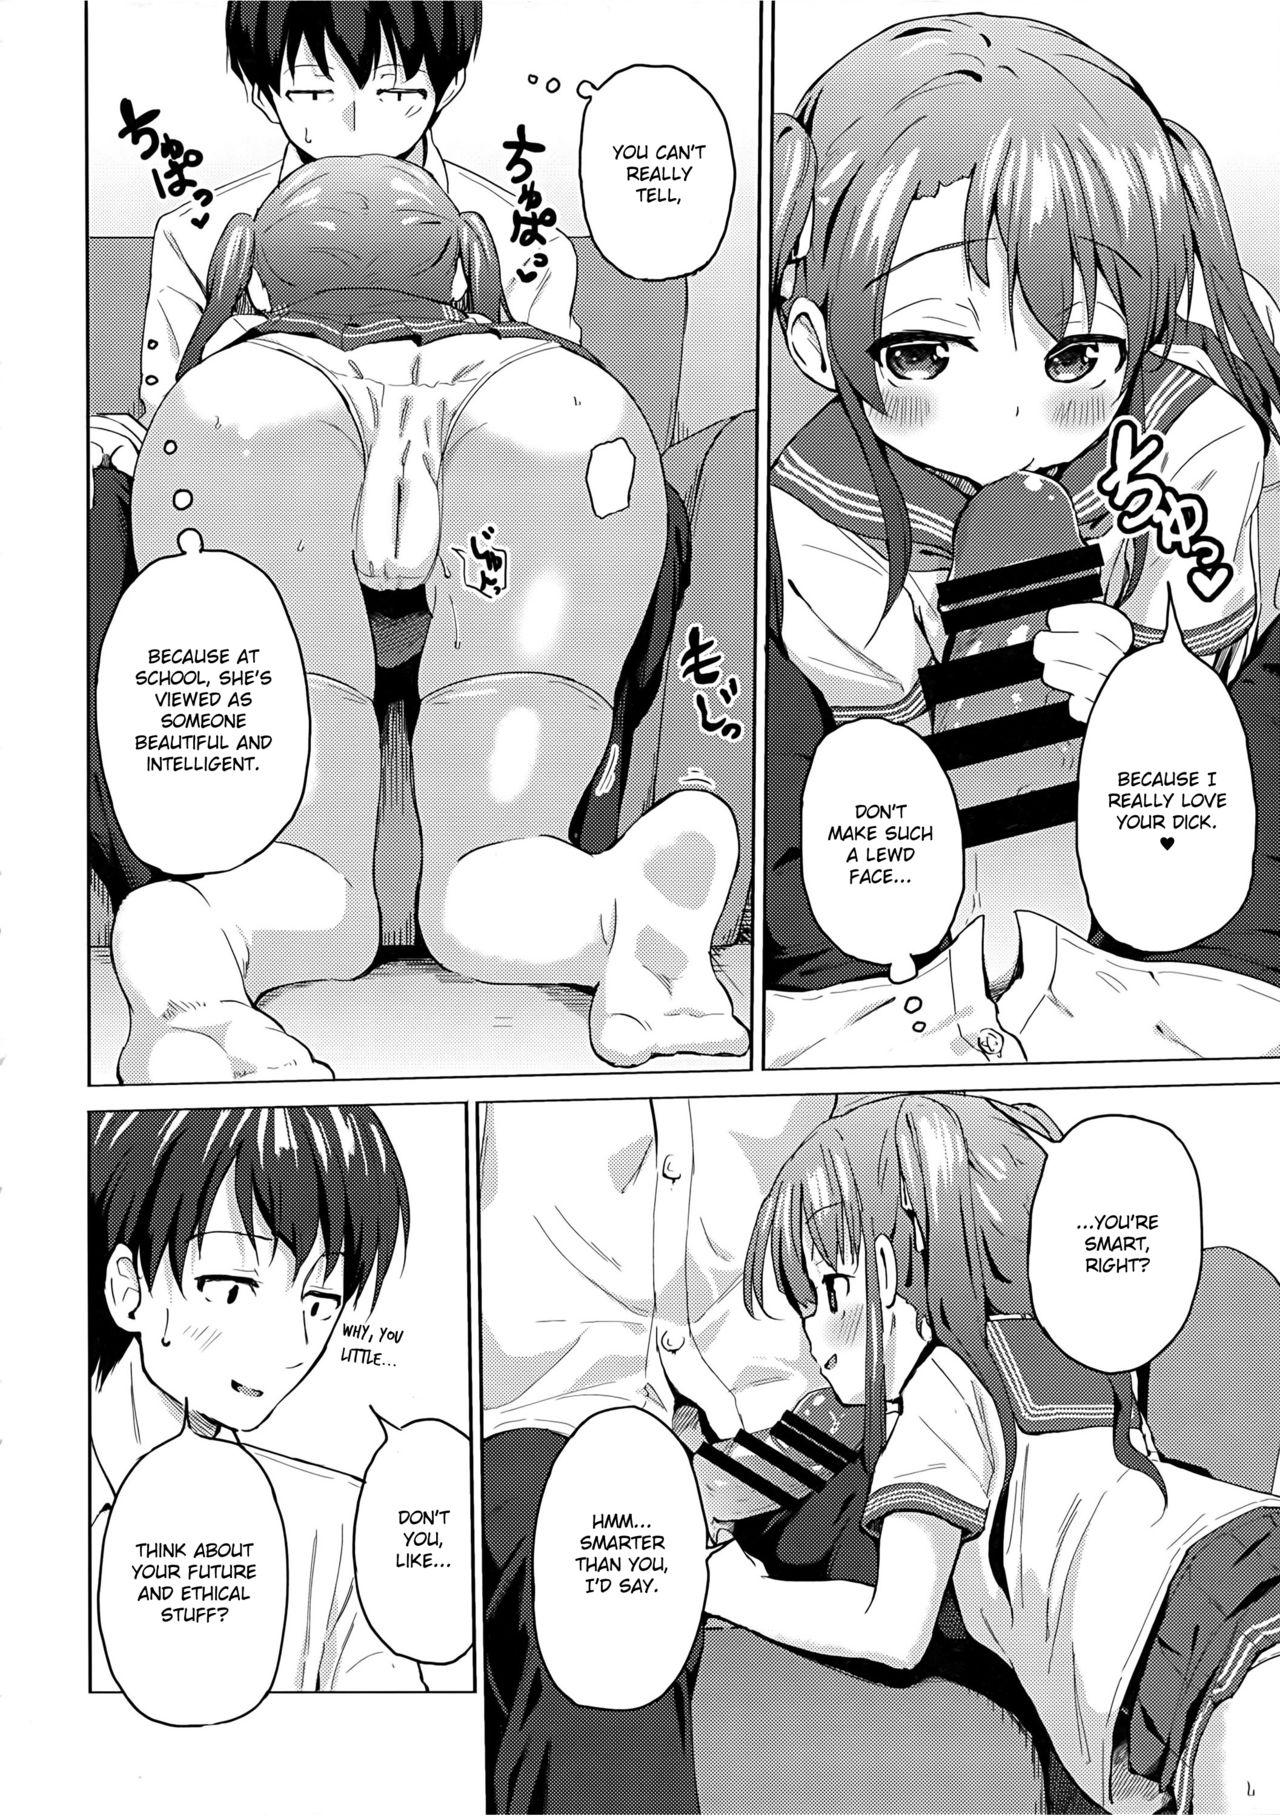 Big Cock Imouto wa Ani Senyou | A Little Sister Is Exclusive Only for Her Big Brother - Original Bitch - Page 7